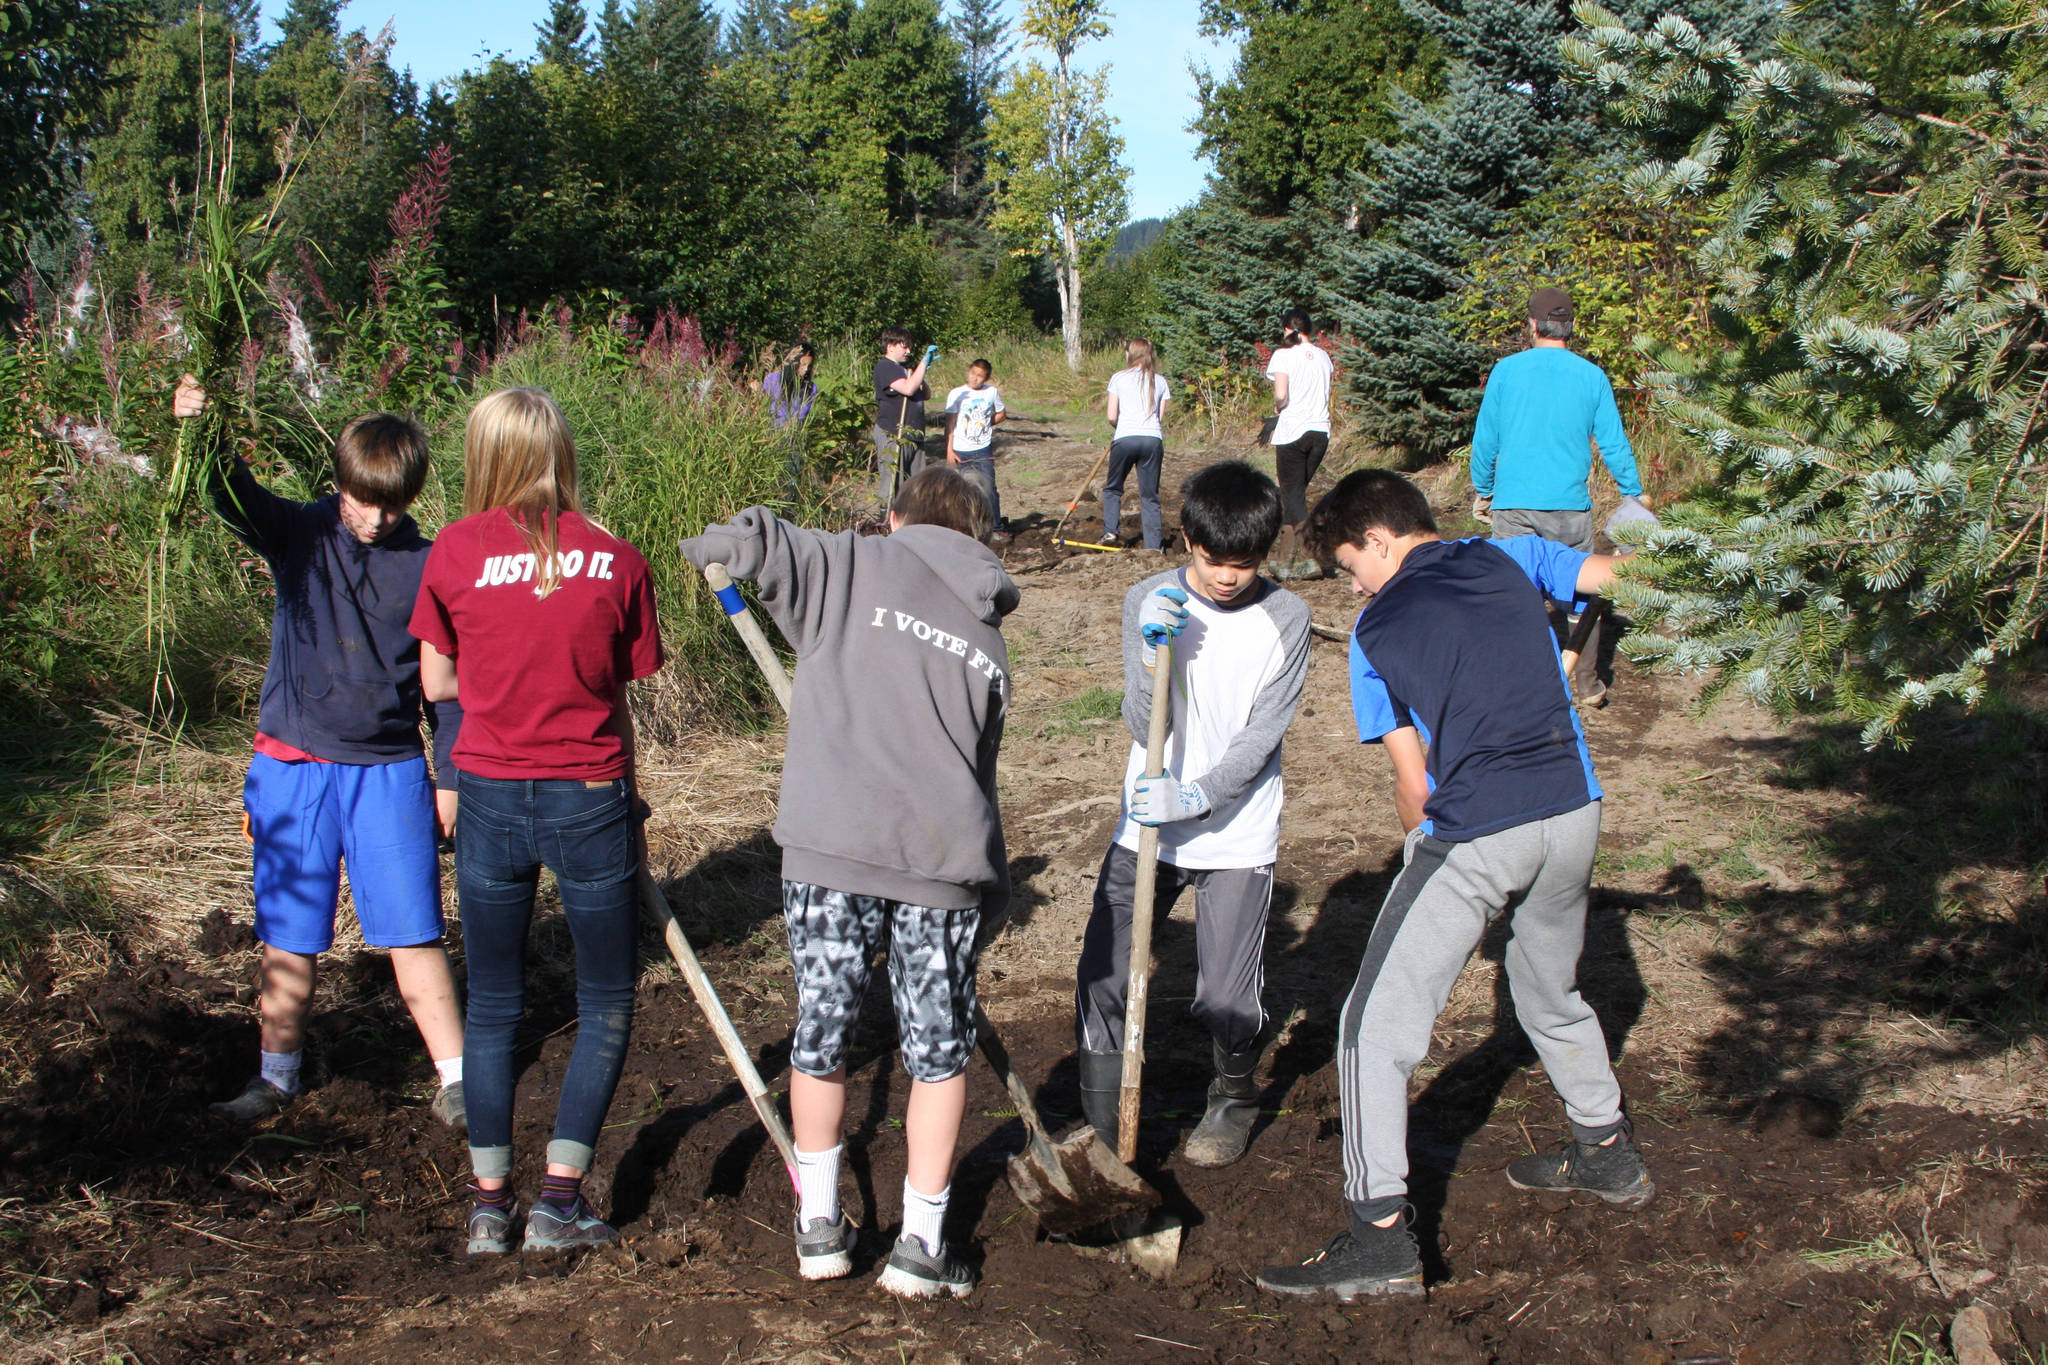 Homer Middle School eighth grade students dig ditches at Area 9 on the trail in preparation for the installation of two French drain systems at the restoration event on Wednesday, Sept. 12, 2018, in Homer, Alaska. (Photo by Delcenia Cosman)